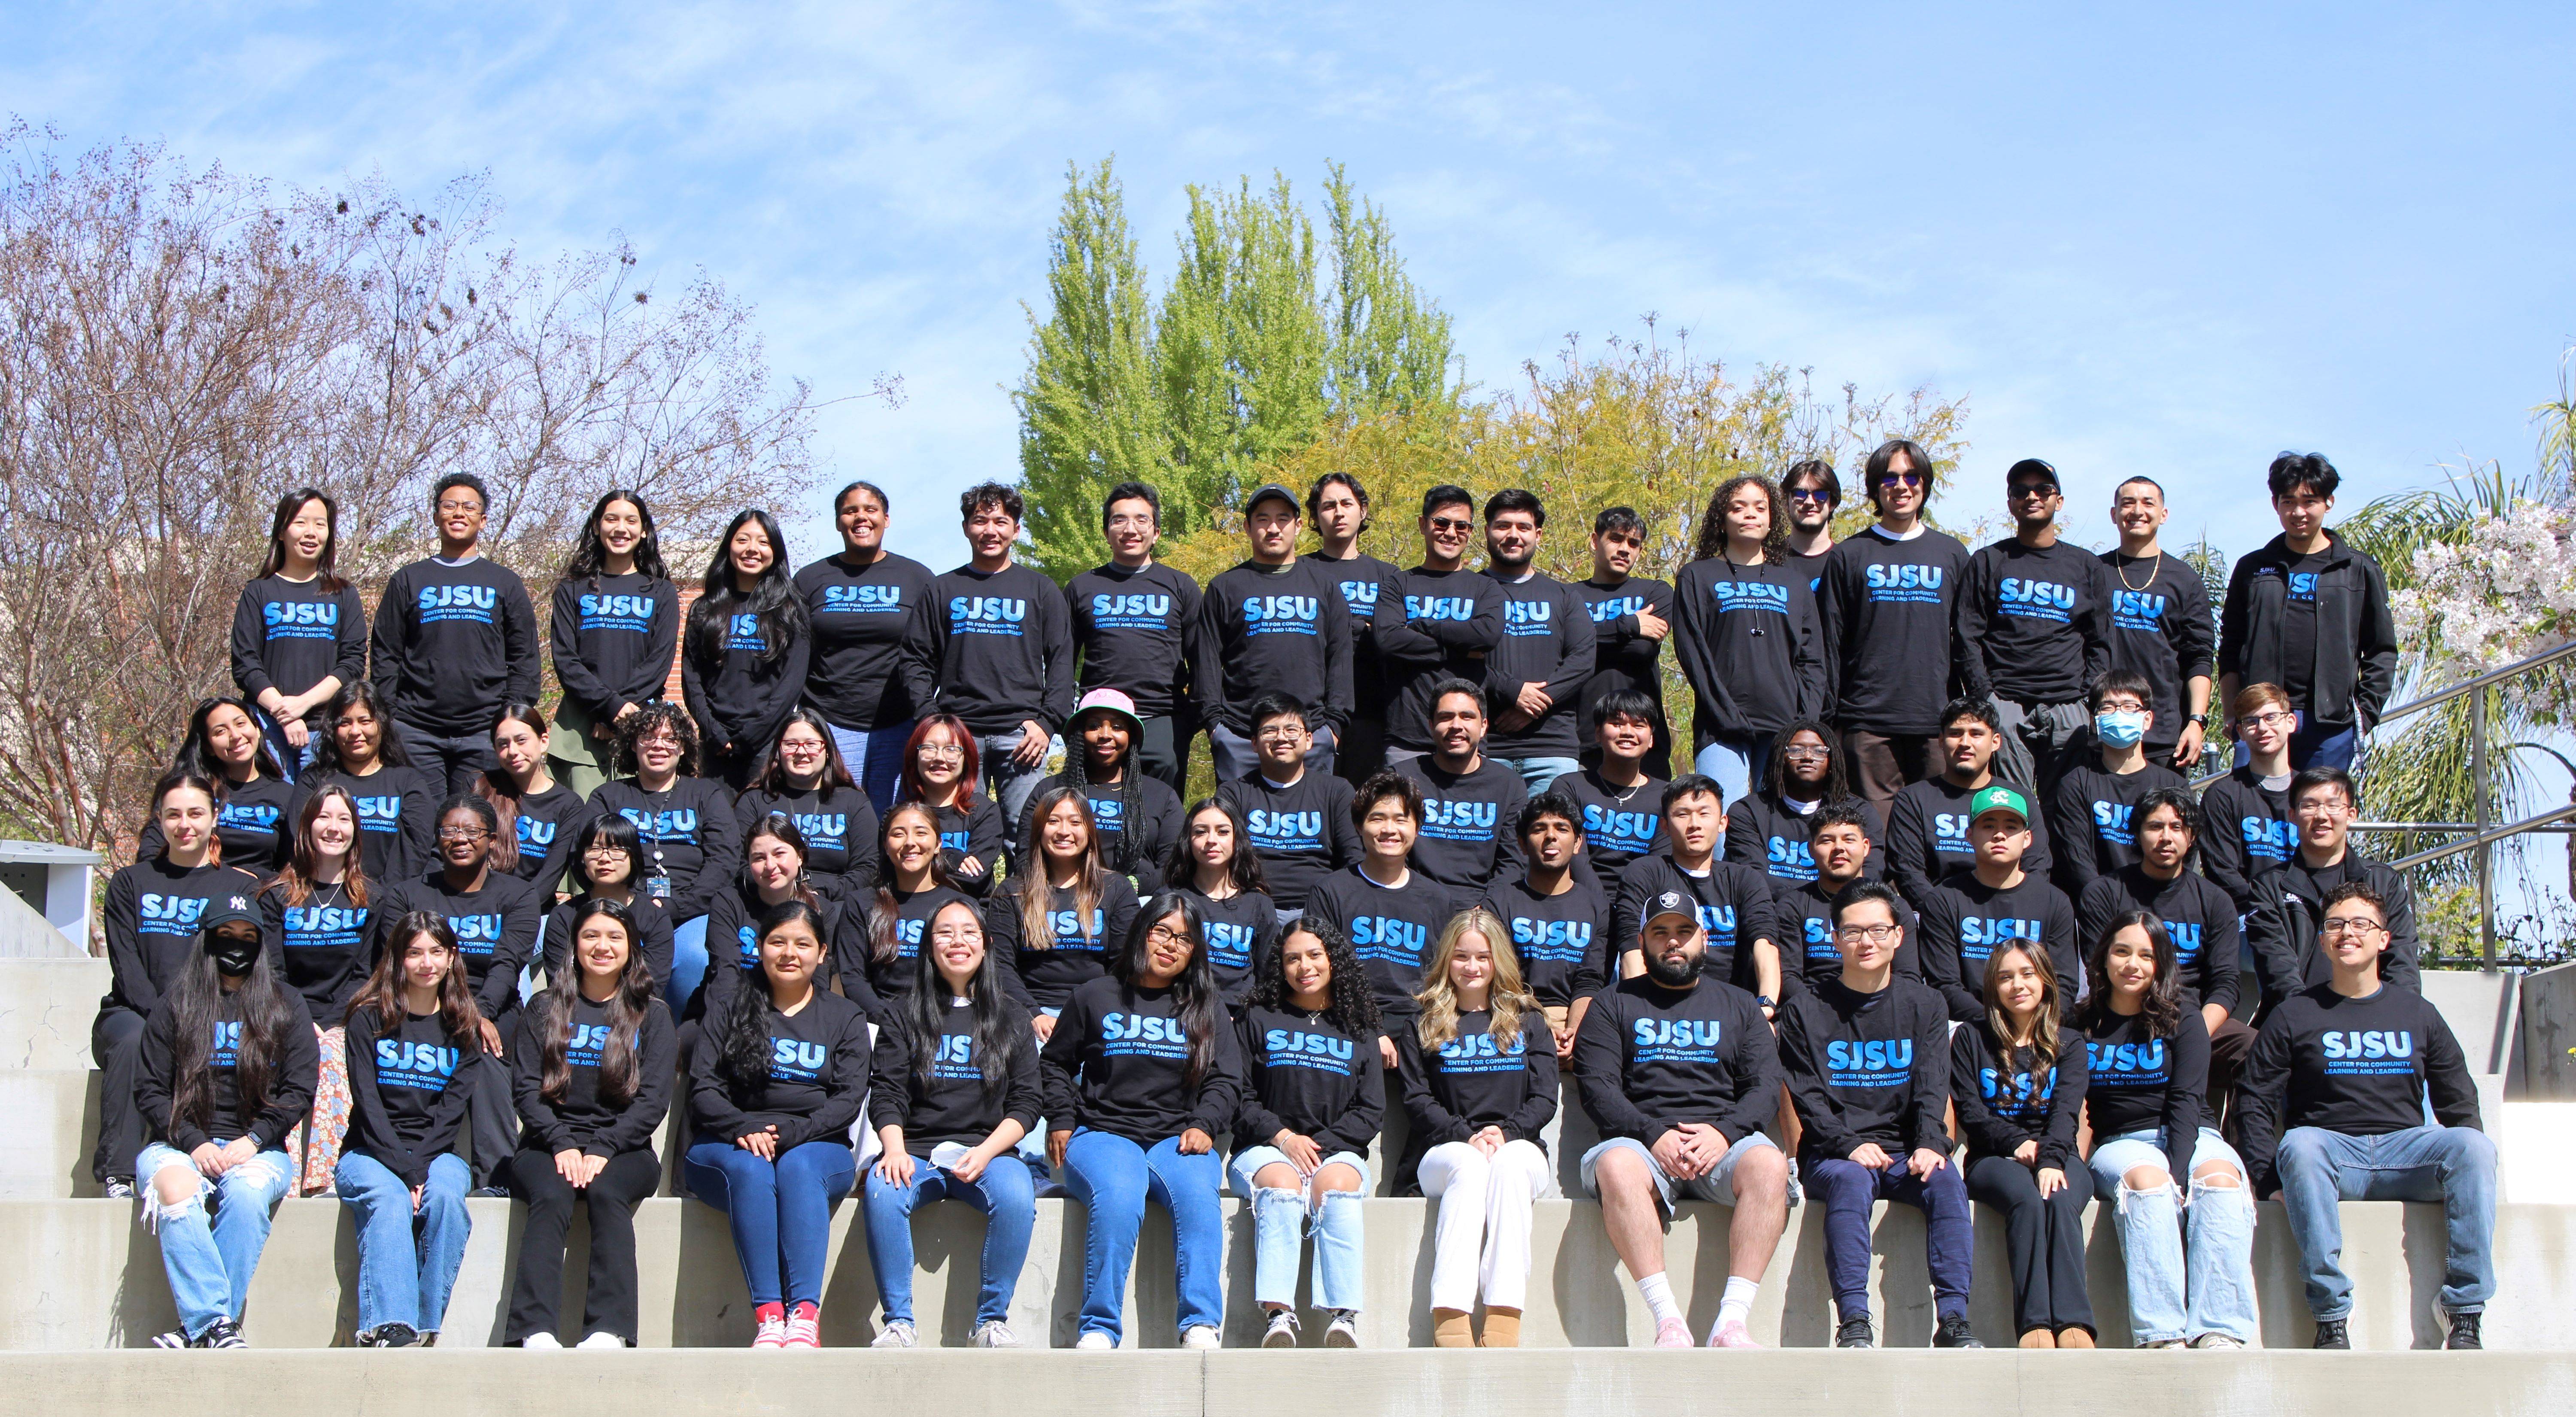 College Corps Cohort in their Center for Community Learning and Leadership shirts